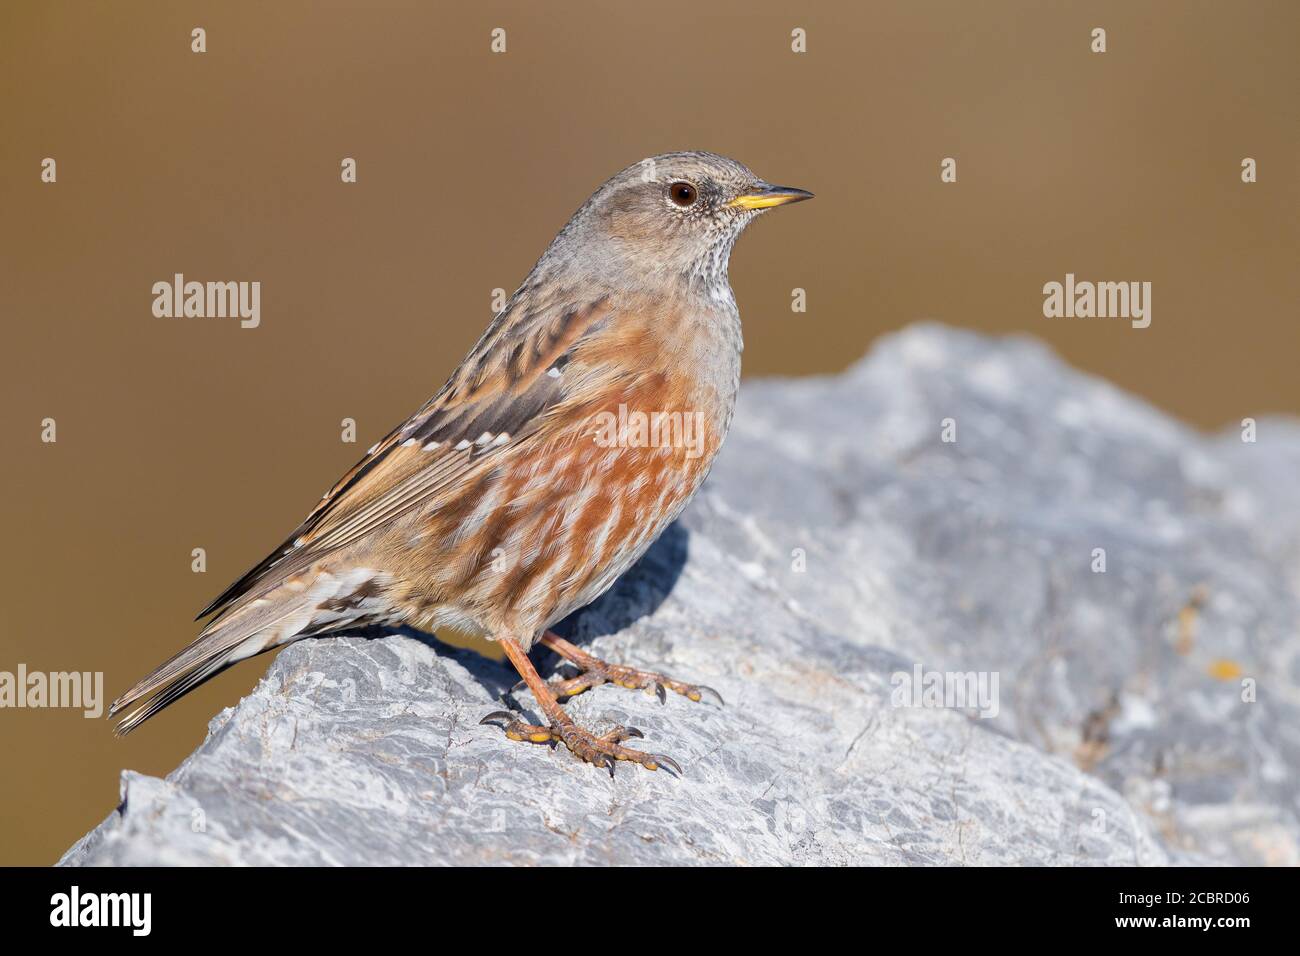 Alpine Accentor (Prunella collaris), side view of an adult perched on a rock, Trentino-Alto Adige, Italy Stock Photo